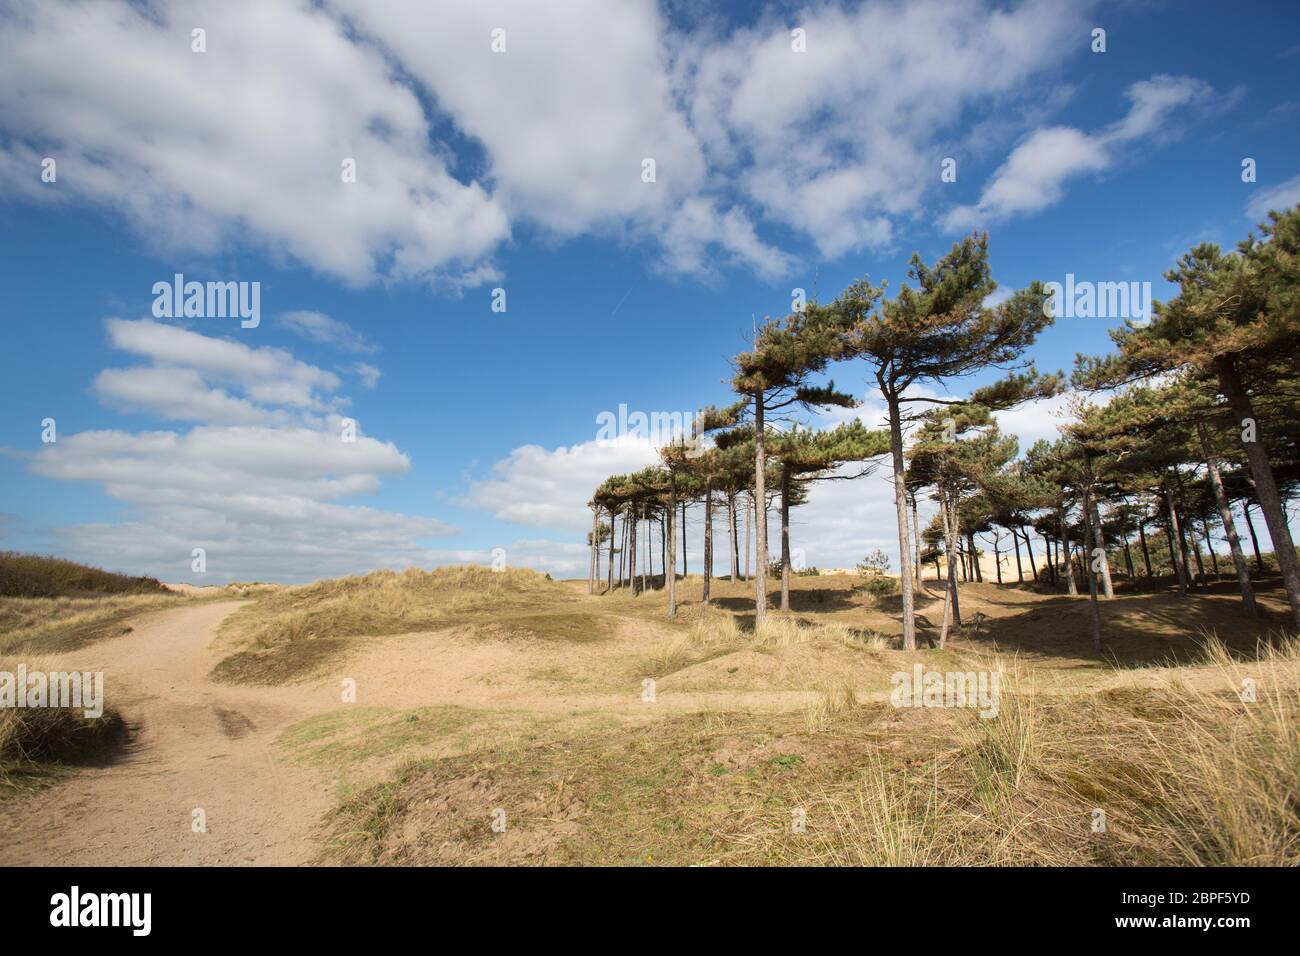 Town of Formby, England. Picturesque view of sand dunes and a pine tree forest at Formby Beach. Stock Photo